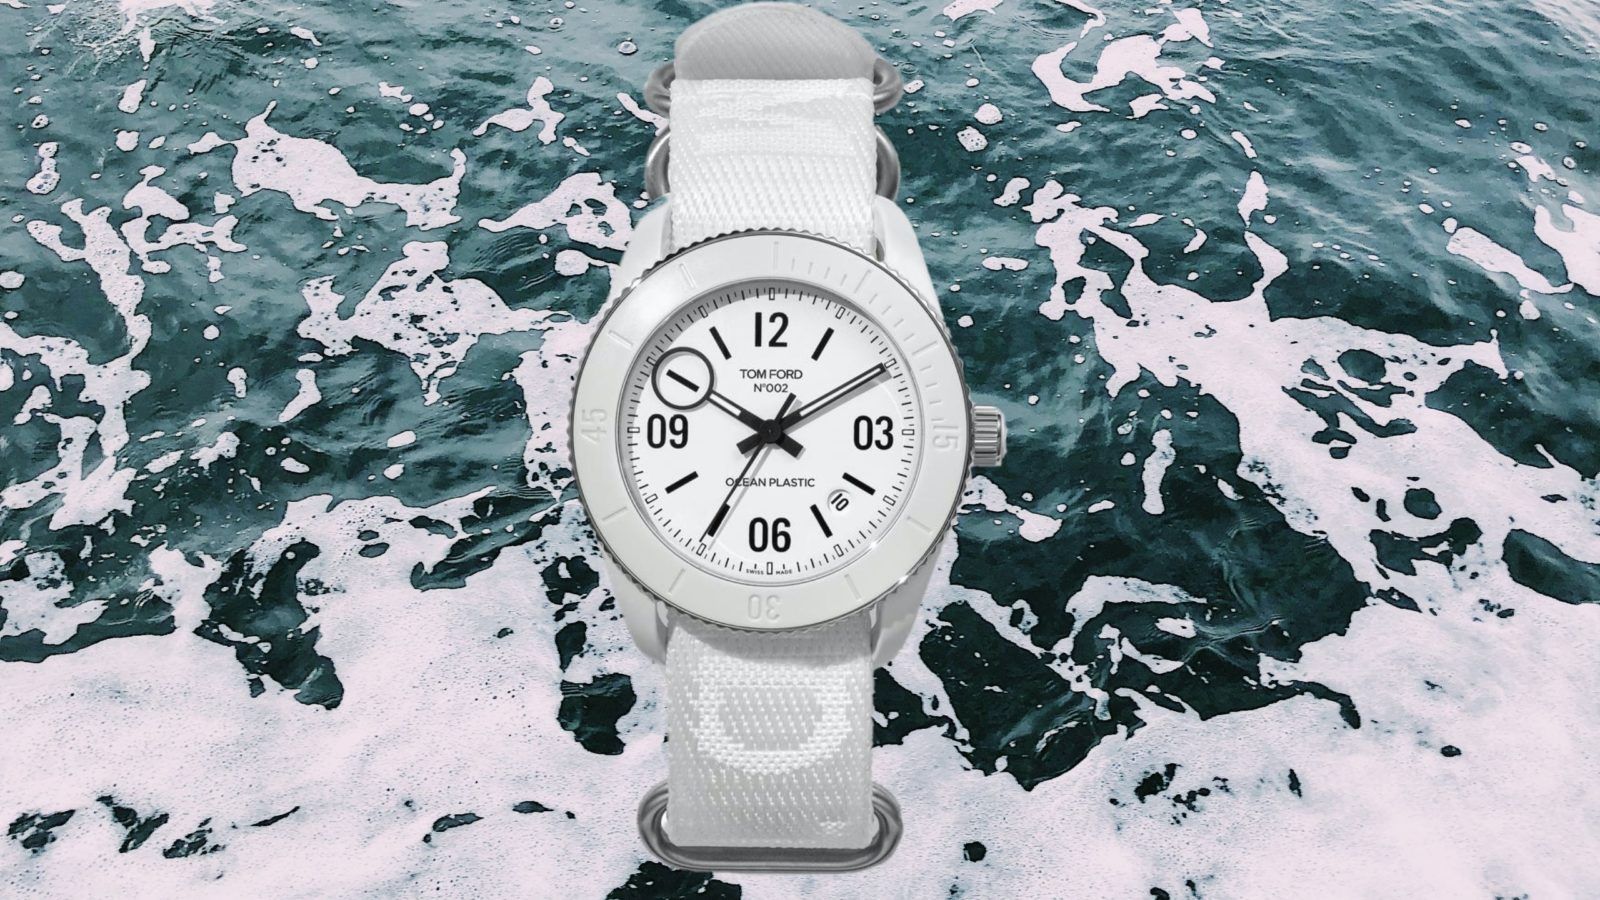 Tom Ford’s new automatic Ocean Plastic Sport Watch is made from recycled materials